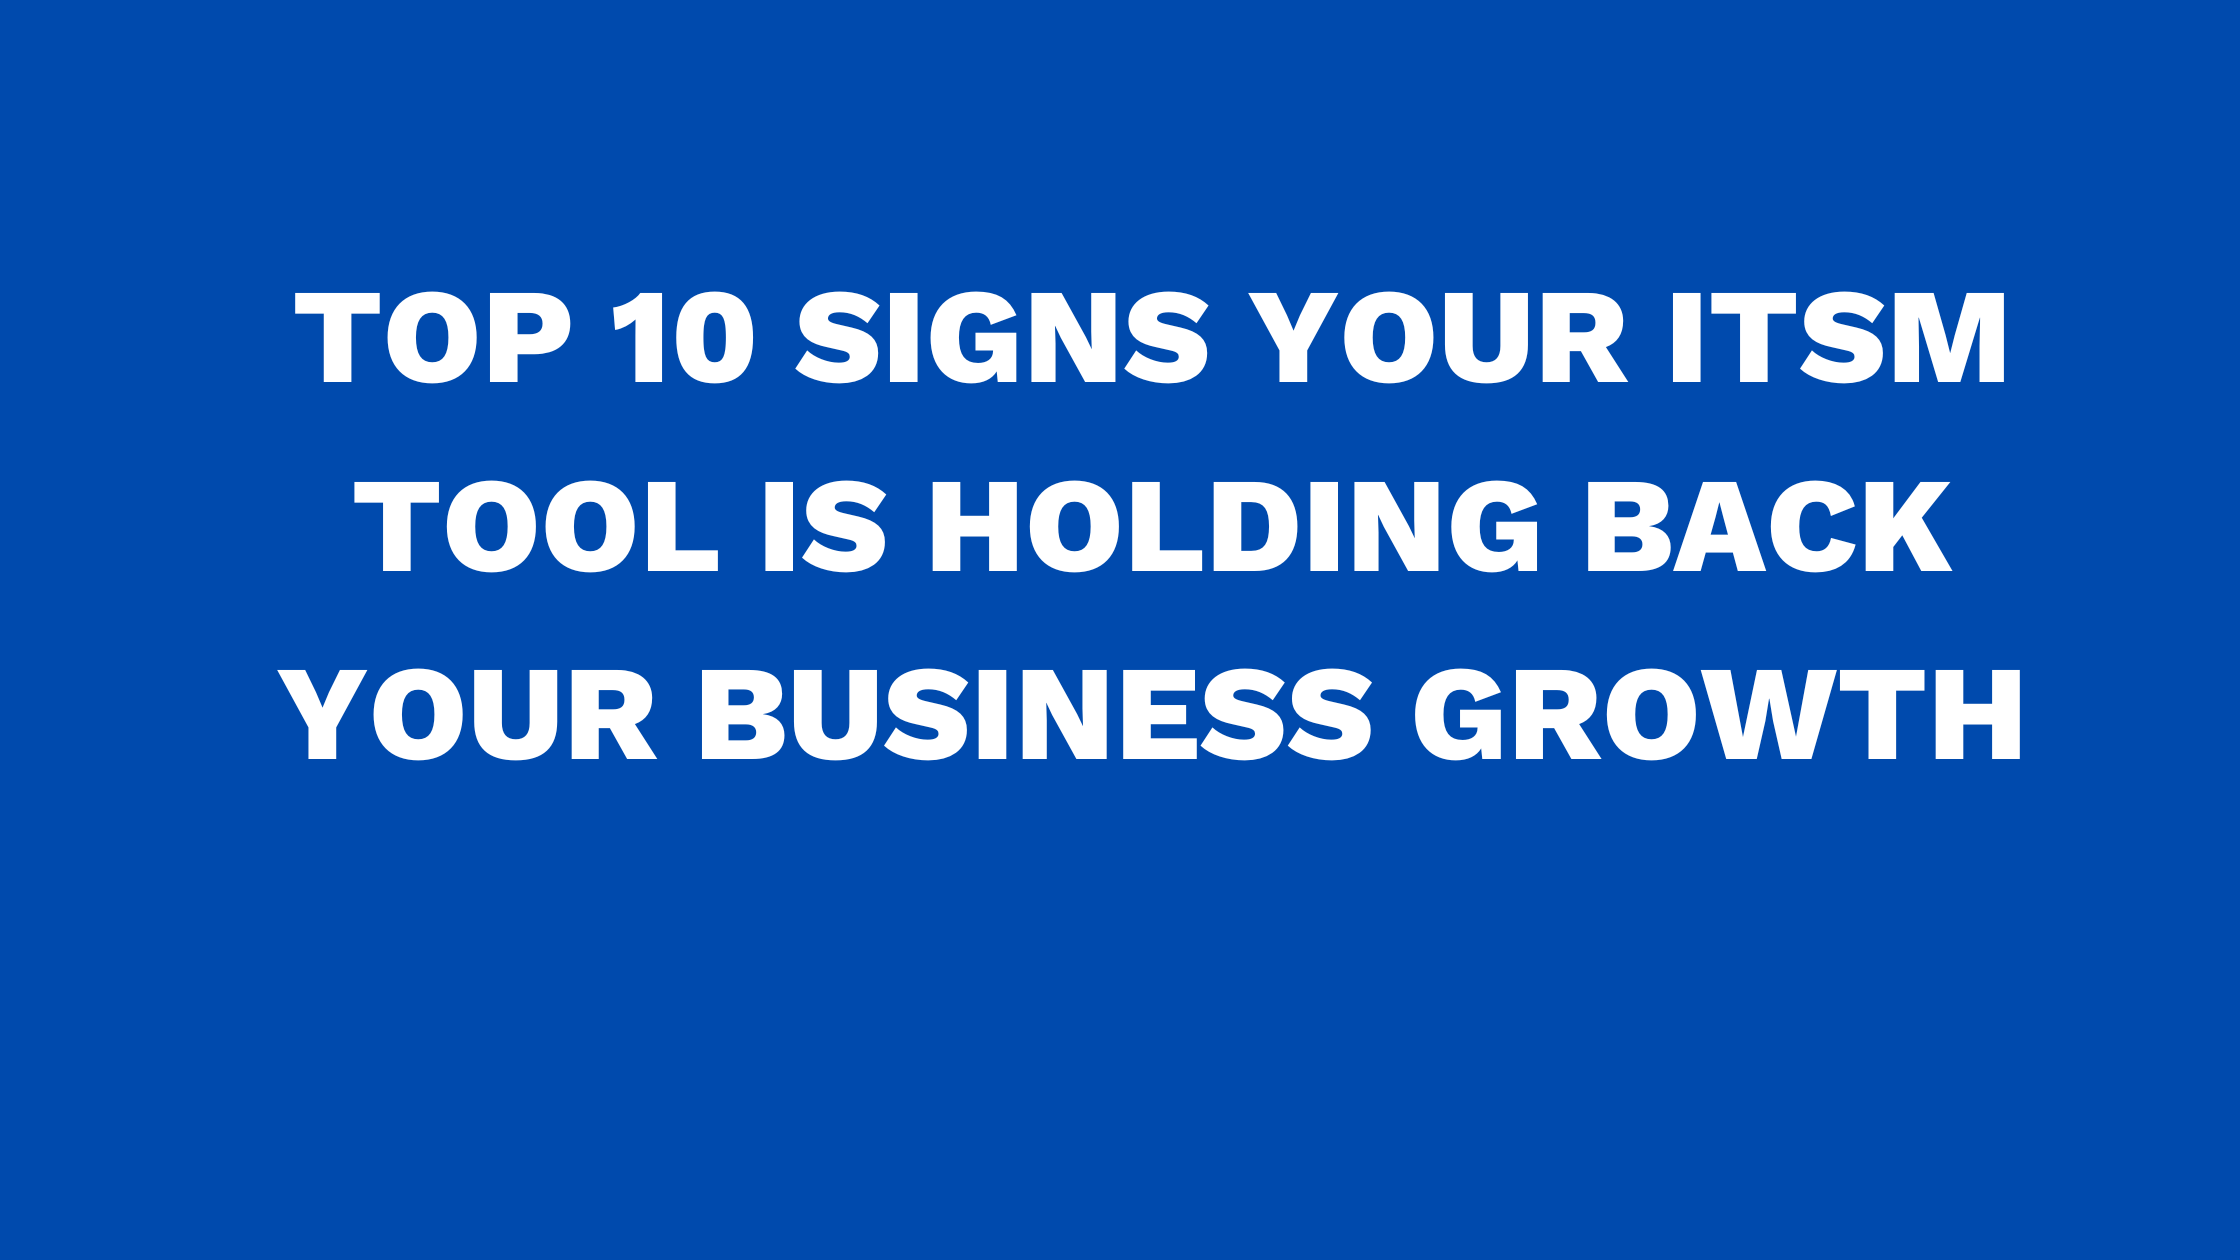 Top 10 signs your ITSM tool is holding back your business growth